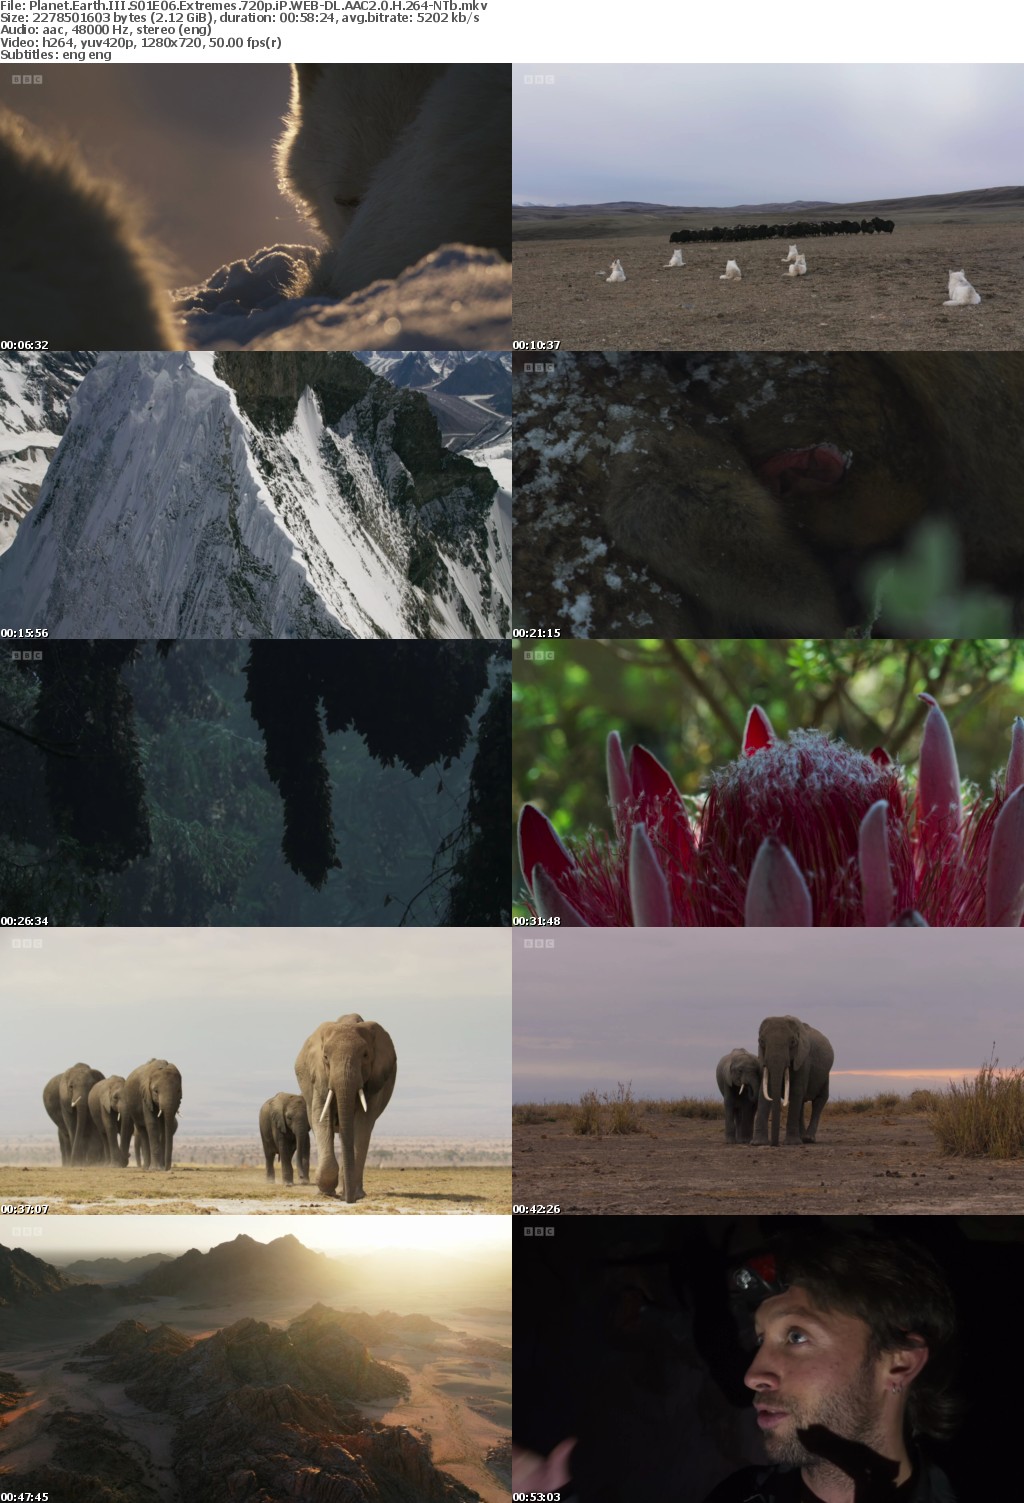 Planet Earth III S01E06 Extremes 720p iP WEB-DL AAC2 0 H 264-NTb